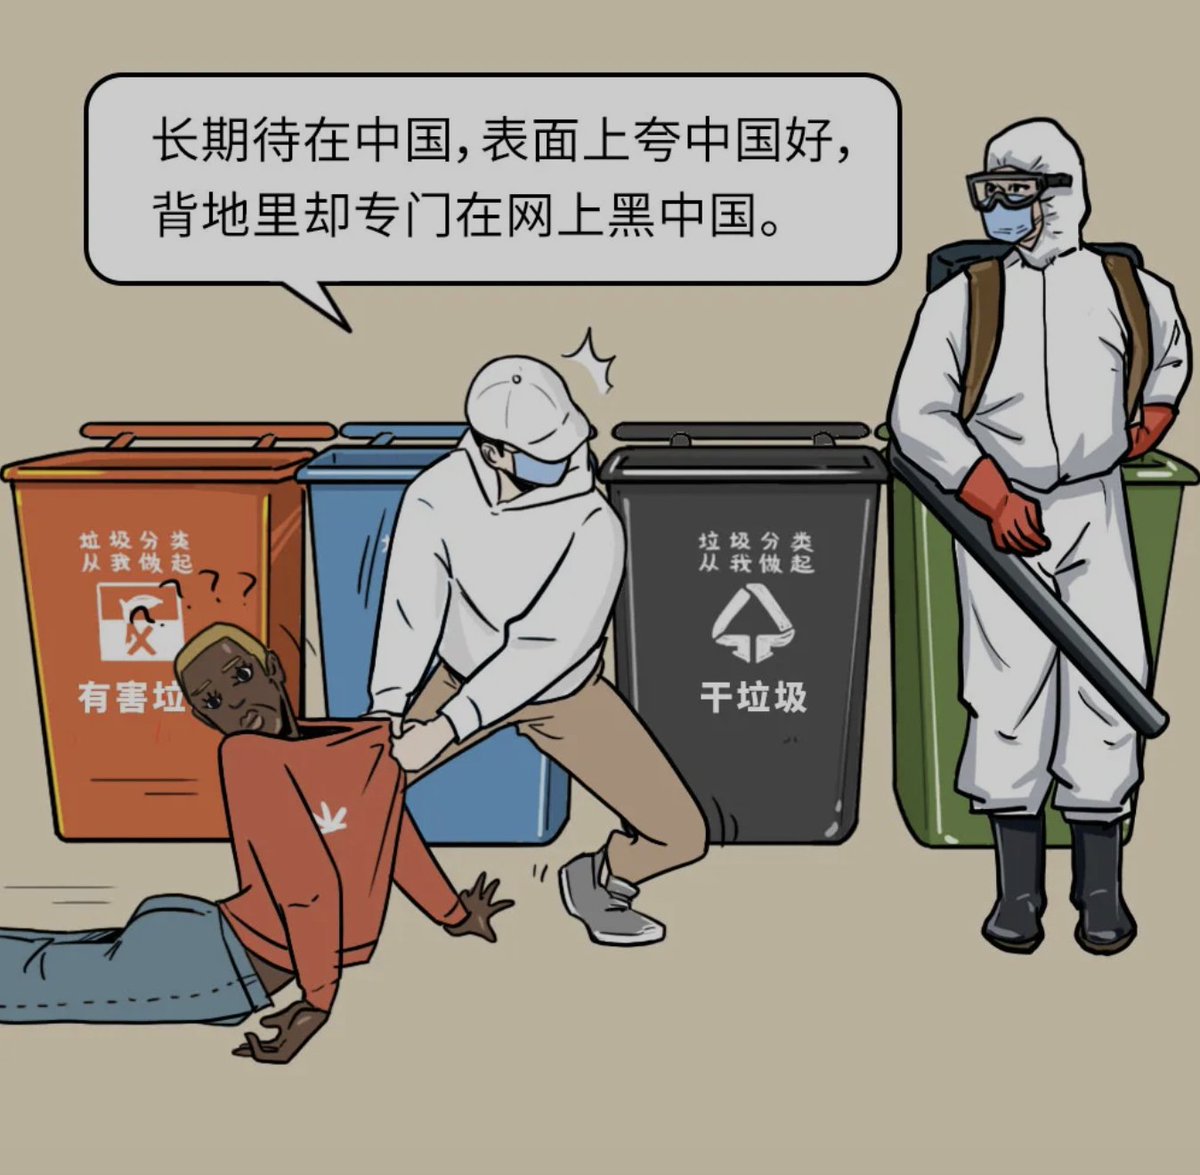 In Hefei two weeks ago I was called 洋垃圾/foreign trash while quietly eating at a restaurant. These cartoons inflame already nasty sentiment. Below we have a guy who has been in China a long time, but secretly criticizes the country online.